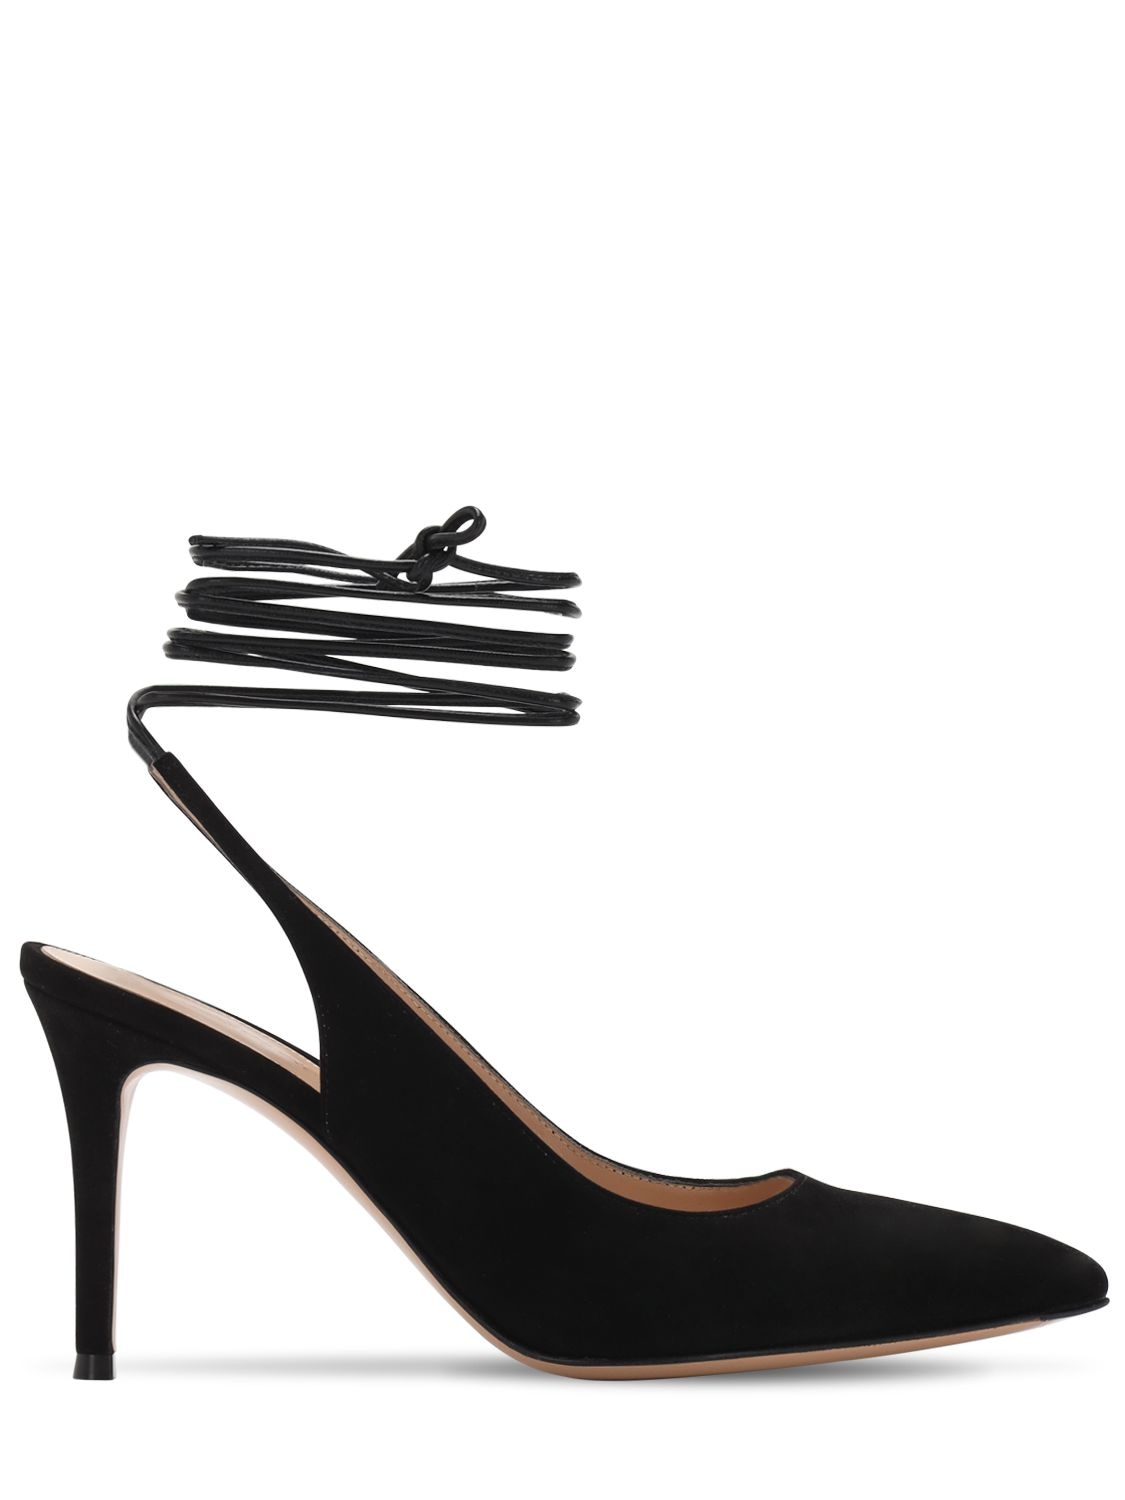 Gianvito Rossi 85mm Suede Lace Up Pumps In Black